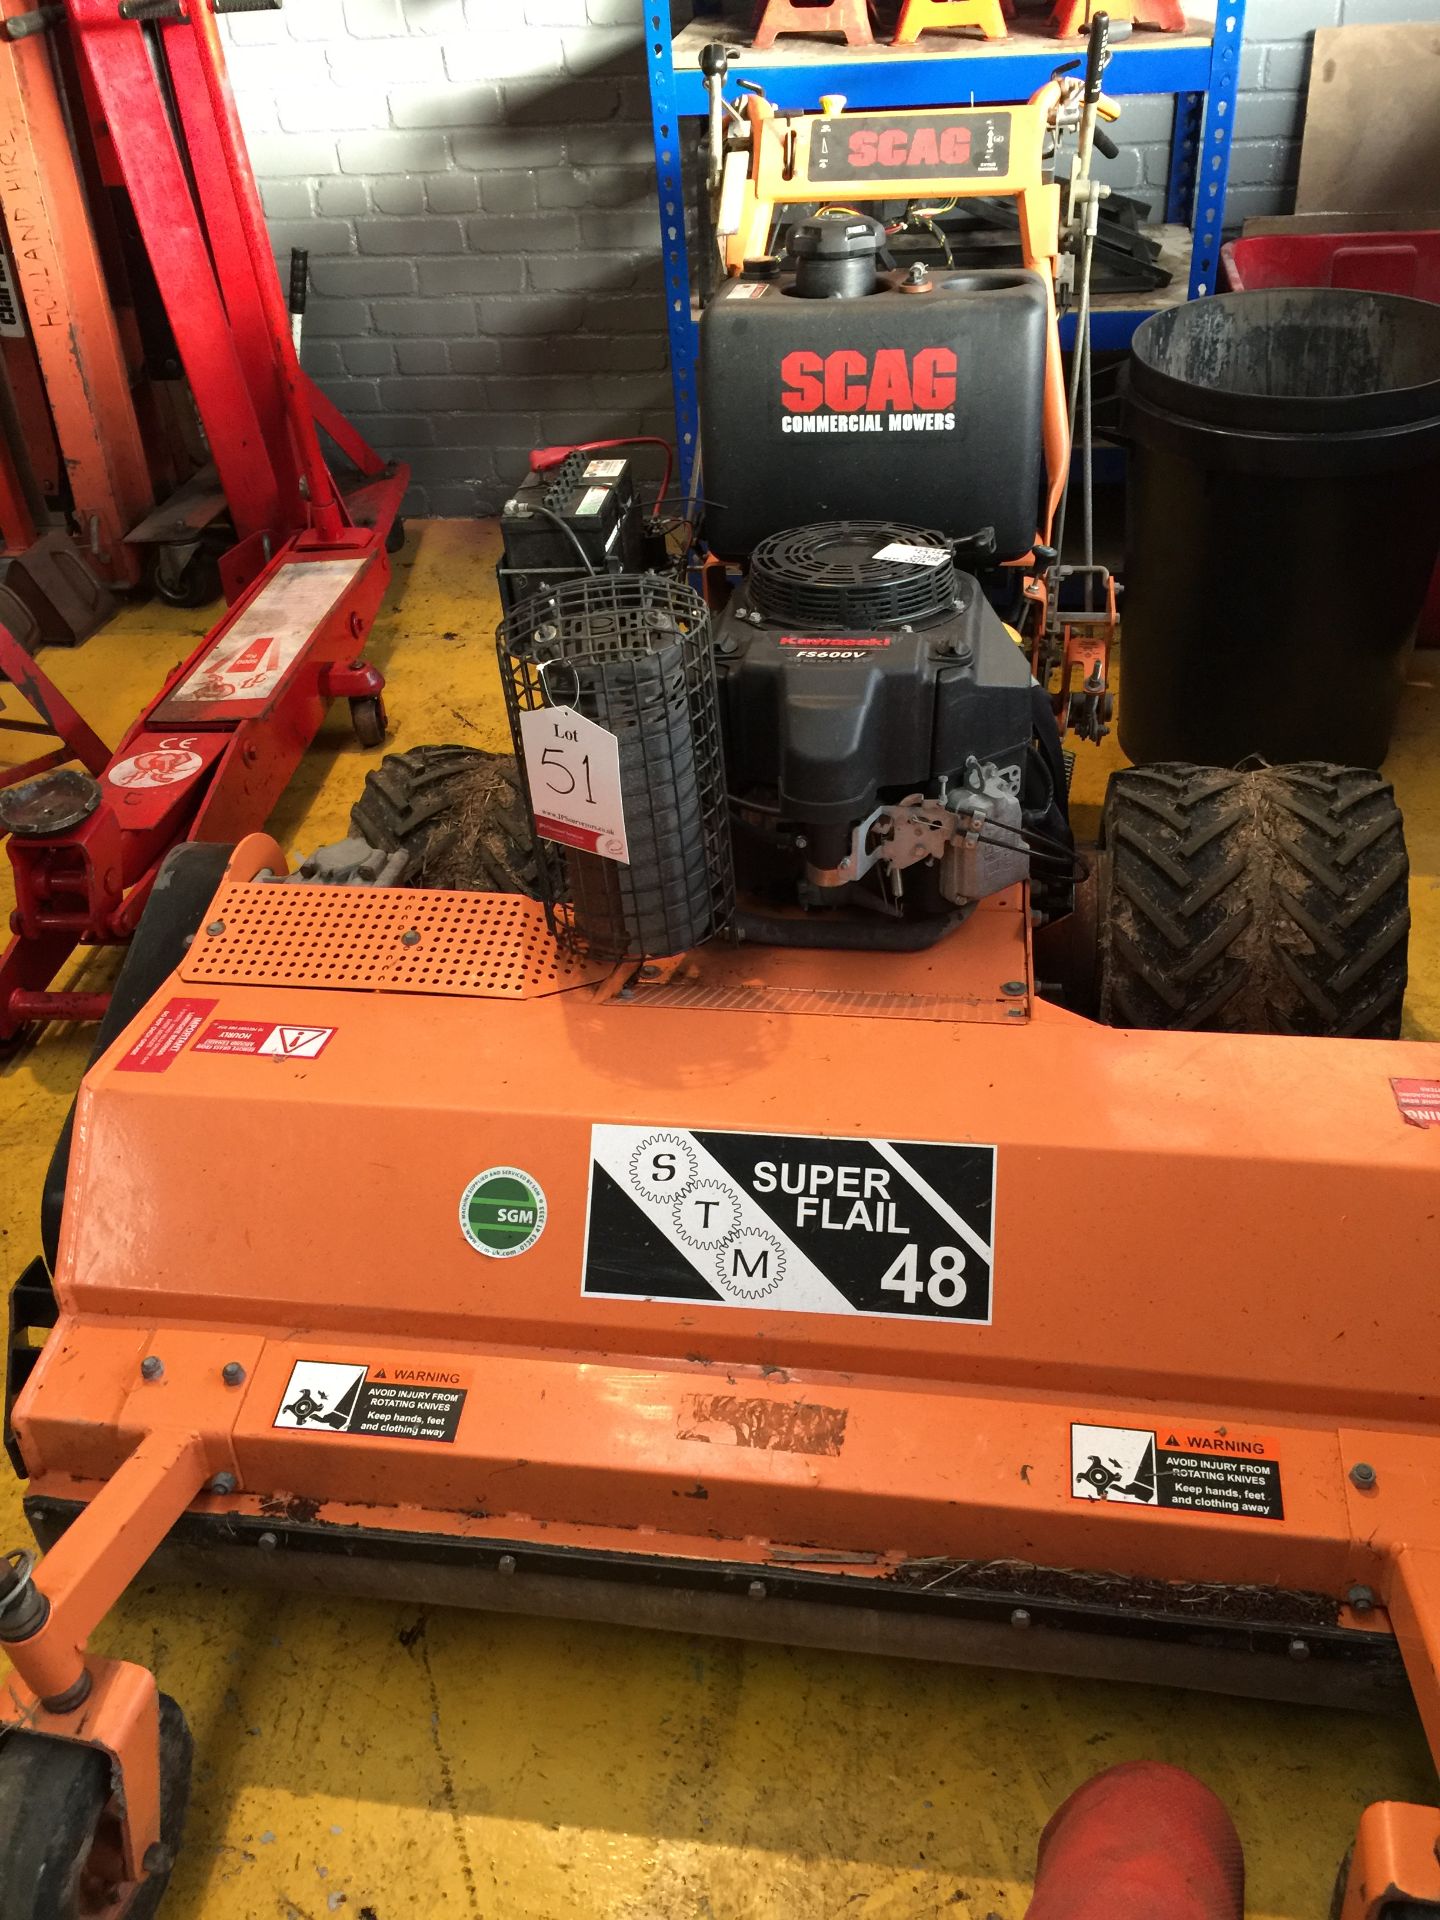 Scag SW236A14FS Pedestrian Rotary Mower with electric starter and Super flail 48